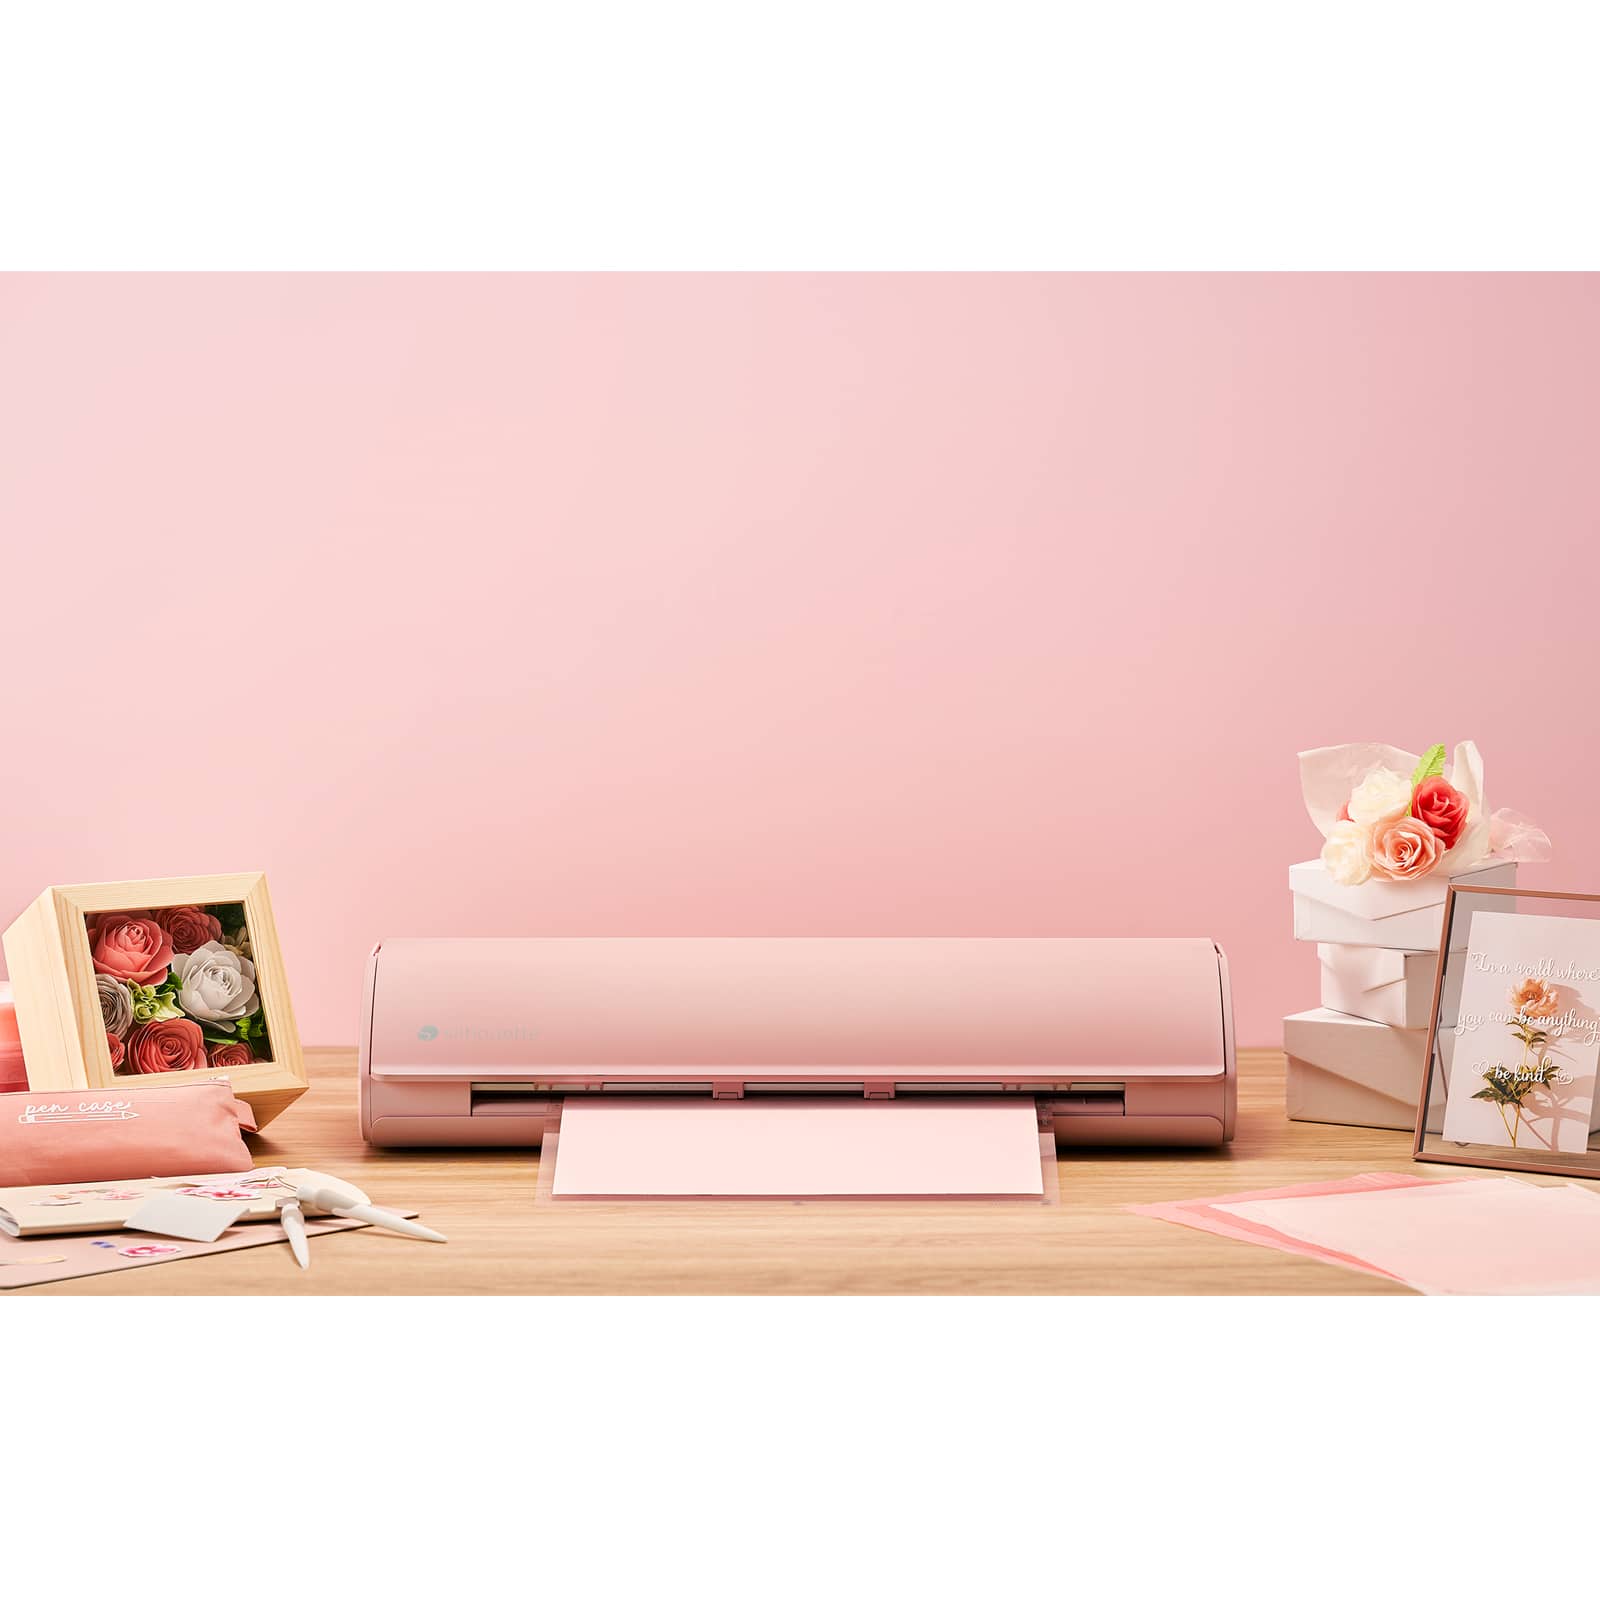 Buy the Silhouette CAMEO® 4 Cutting Machine at Michaels